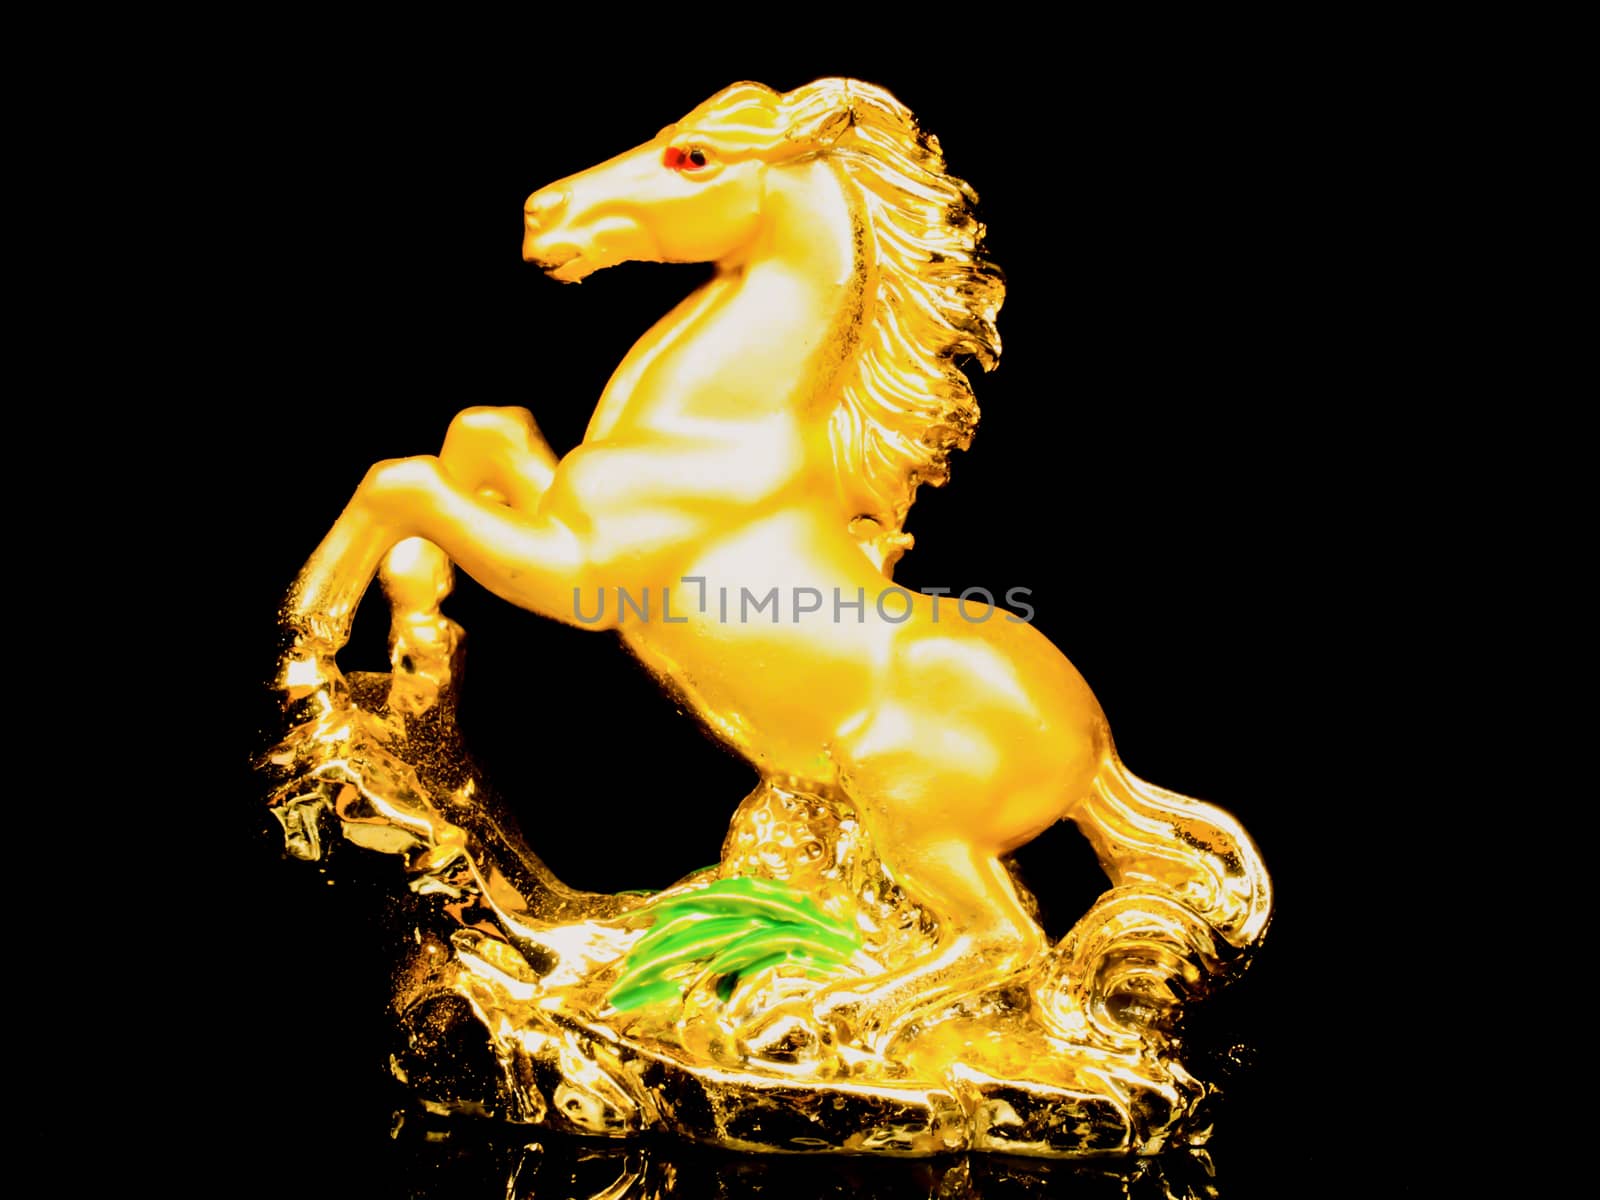 golden horse with black background